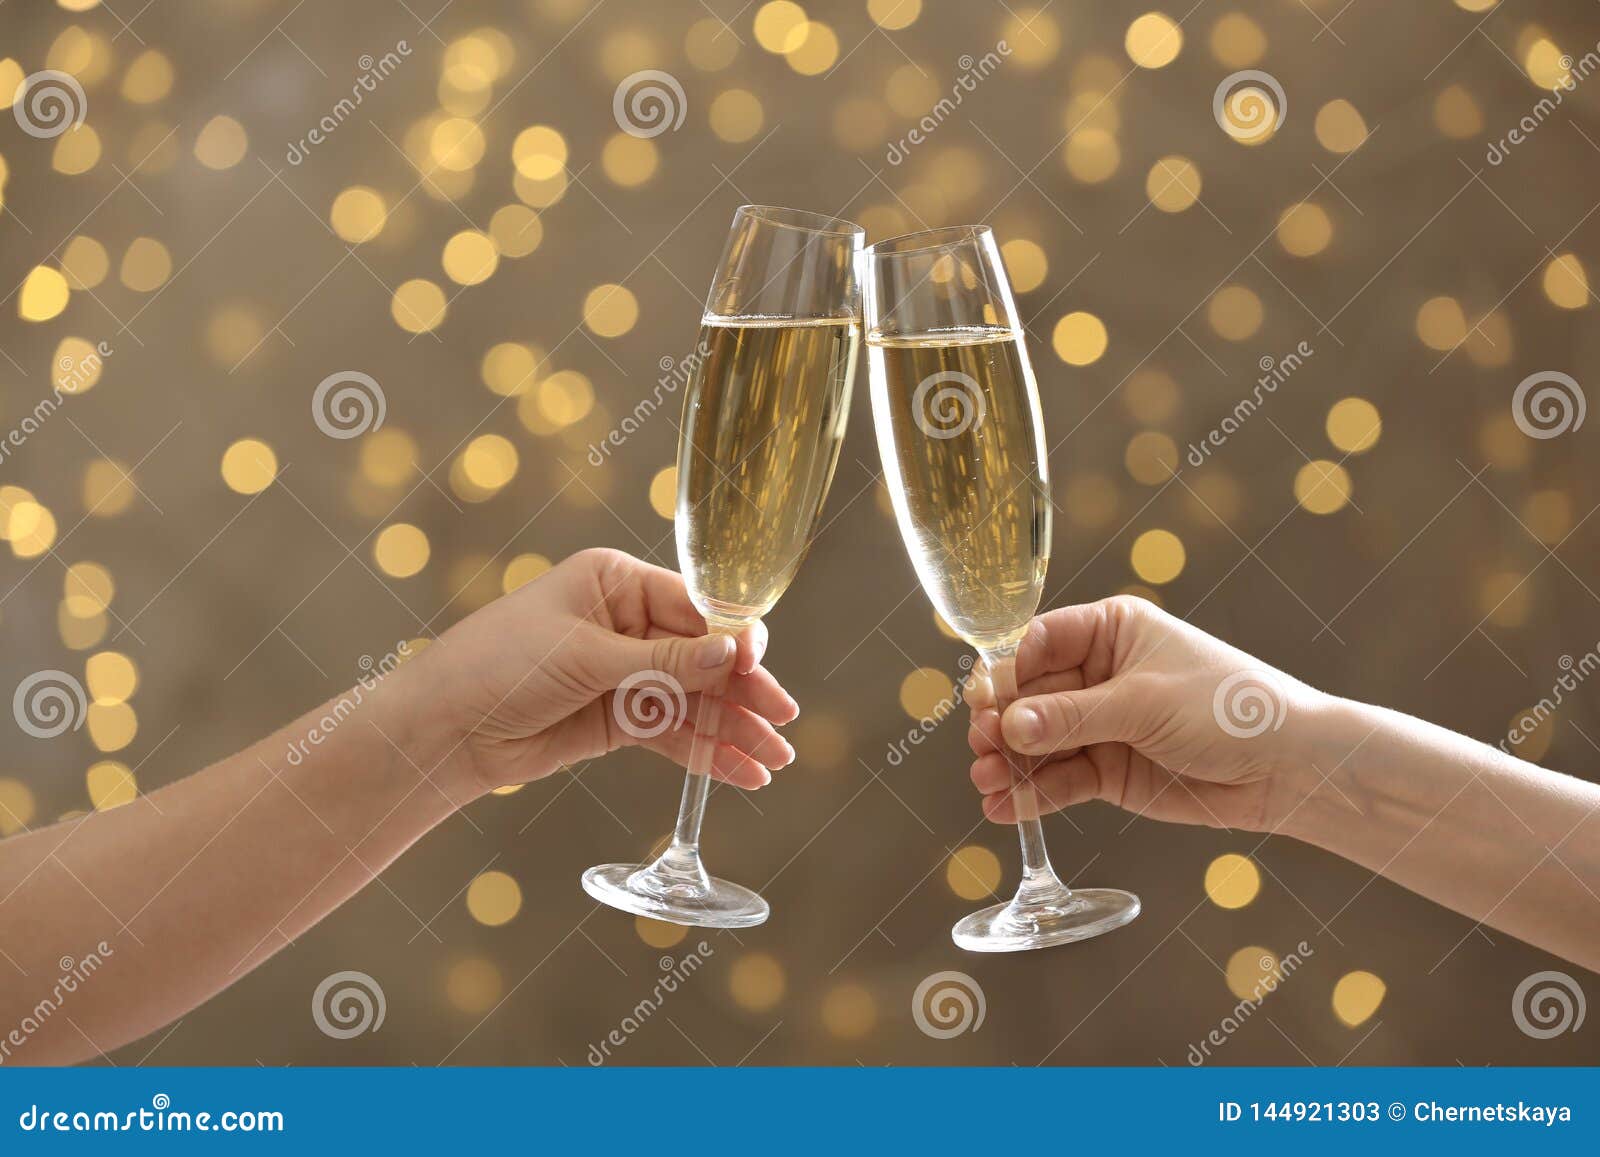 People Clinking Glasses Of Champagne Stock Image Image Of Formal